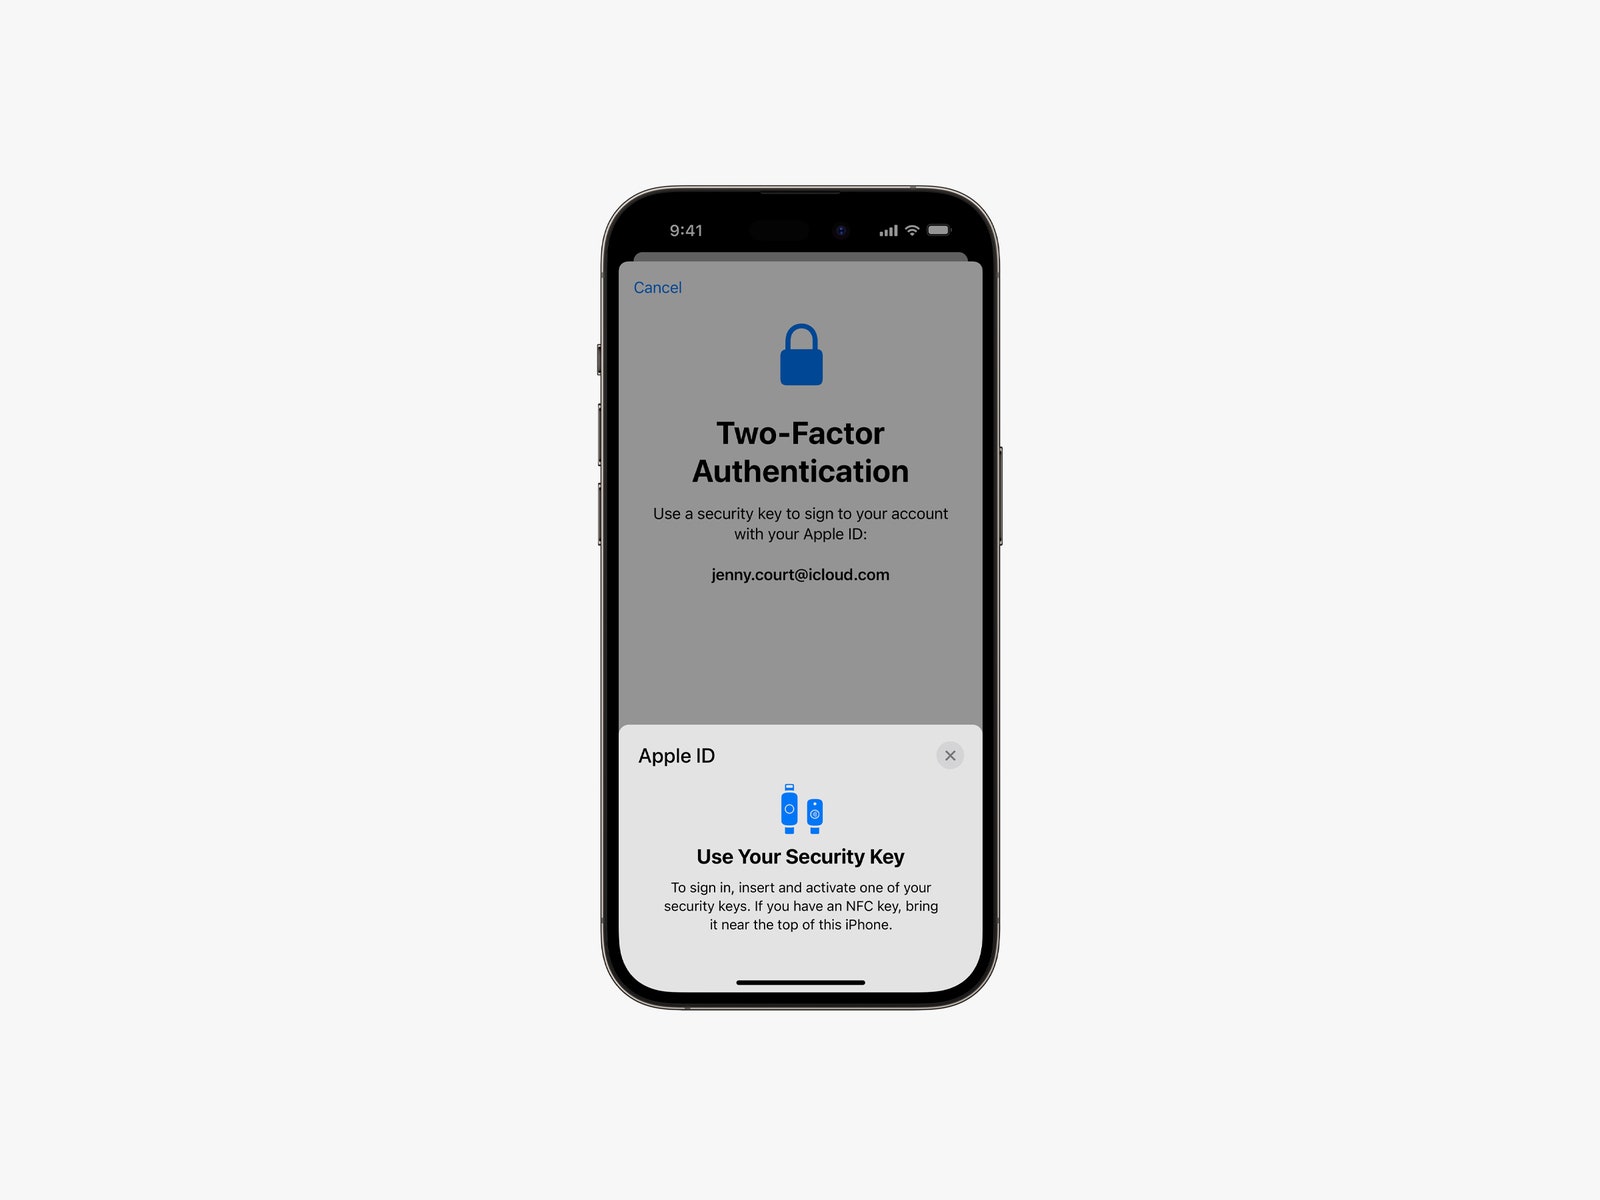 Apple iPhone displaying twofactor authentication and security key prompt.